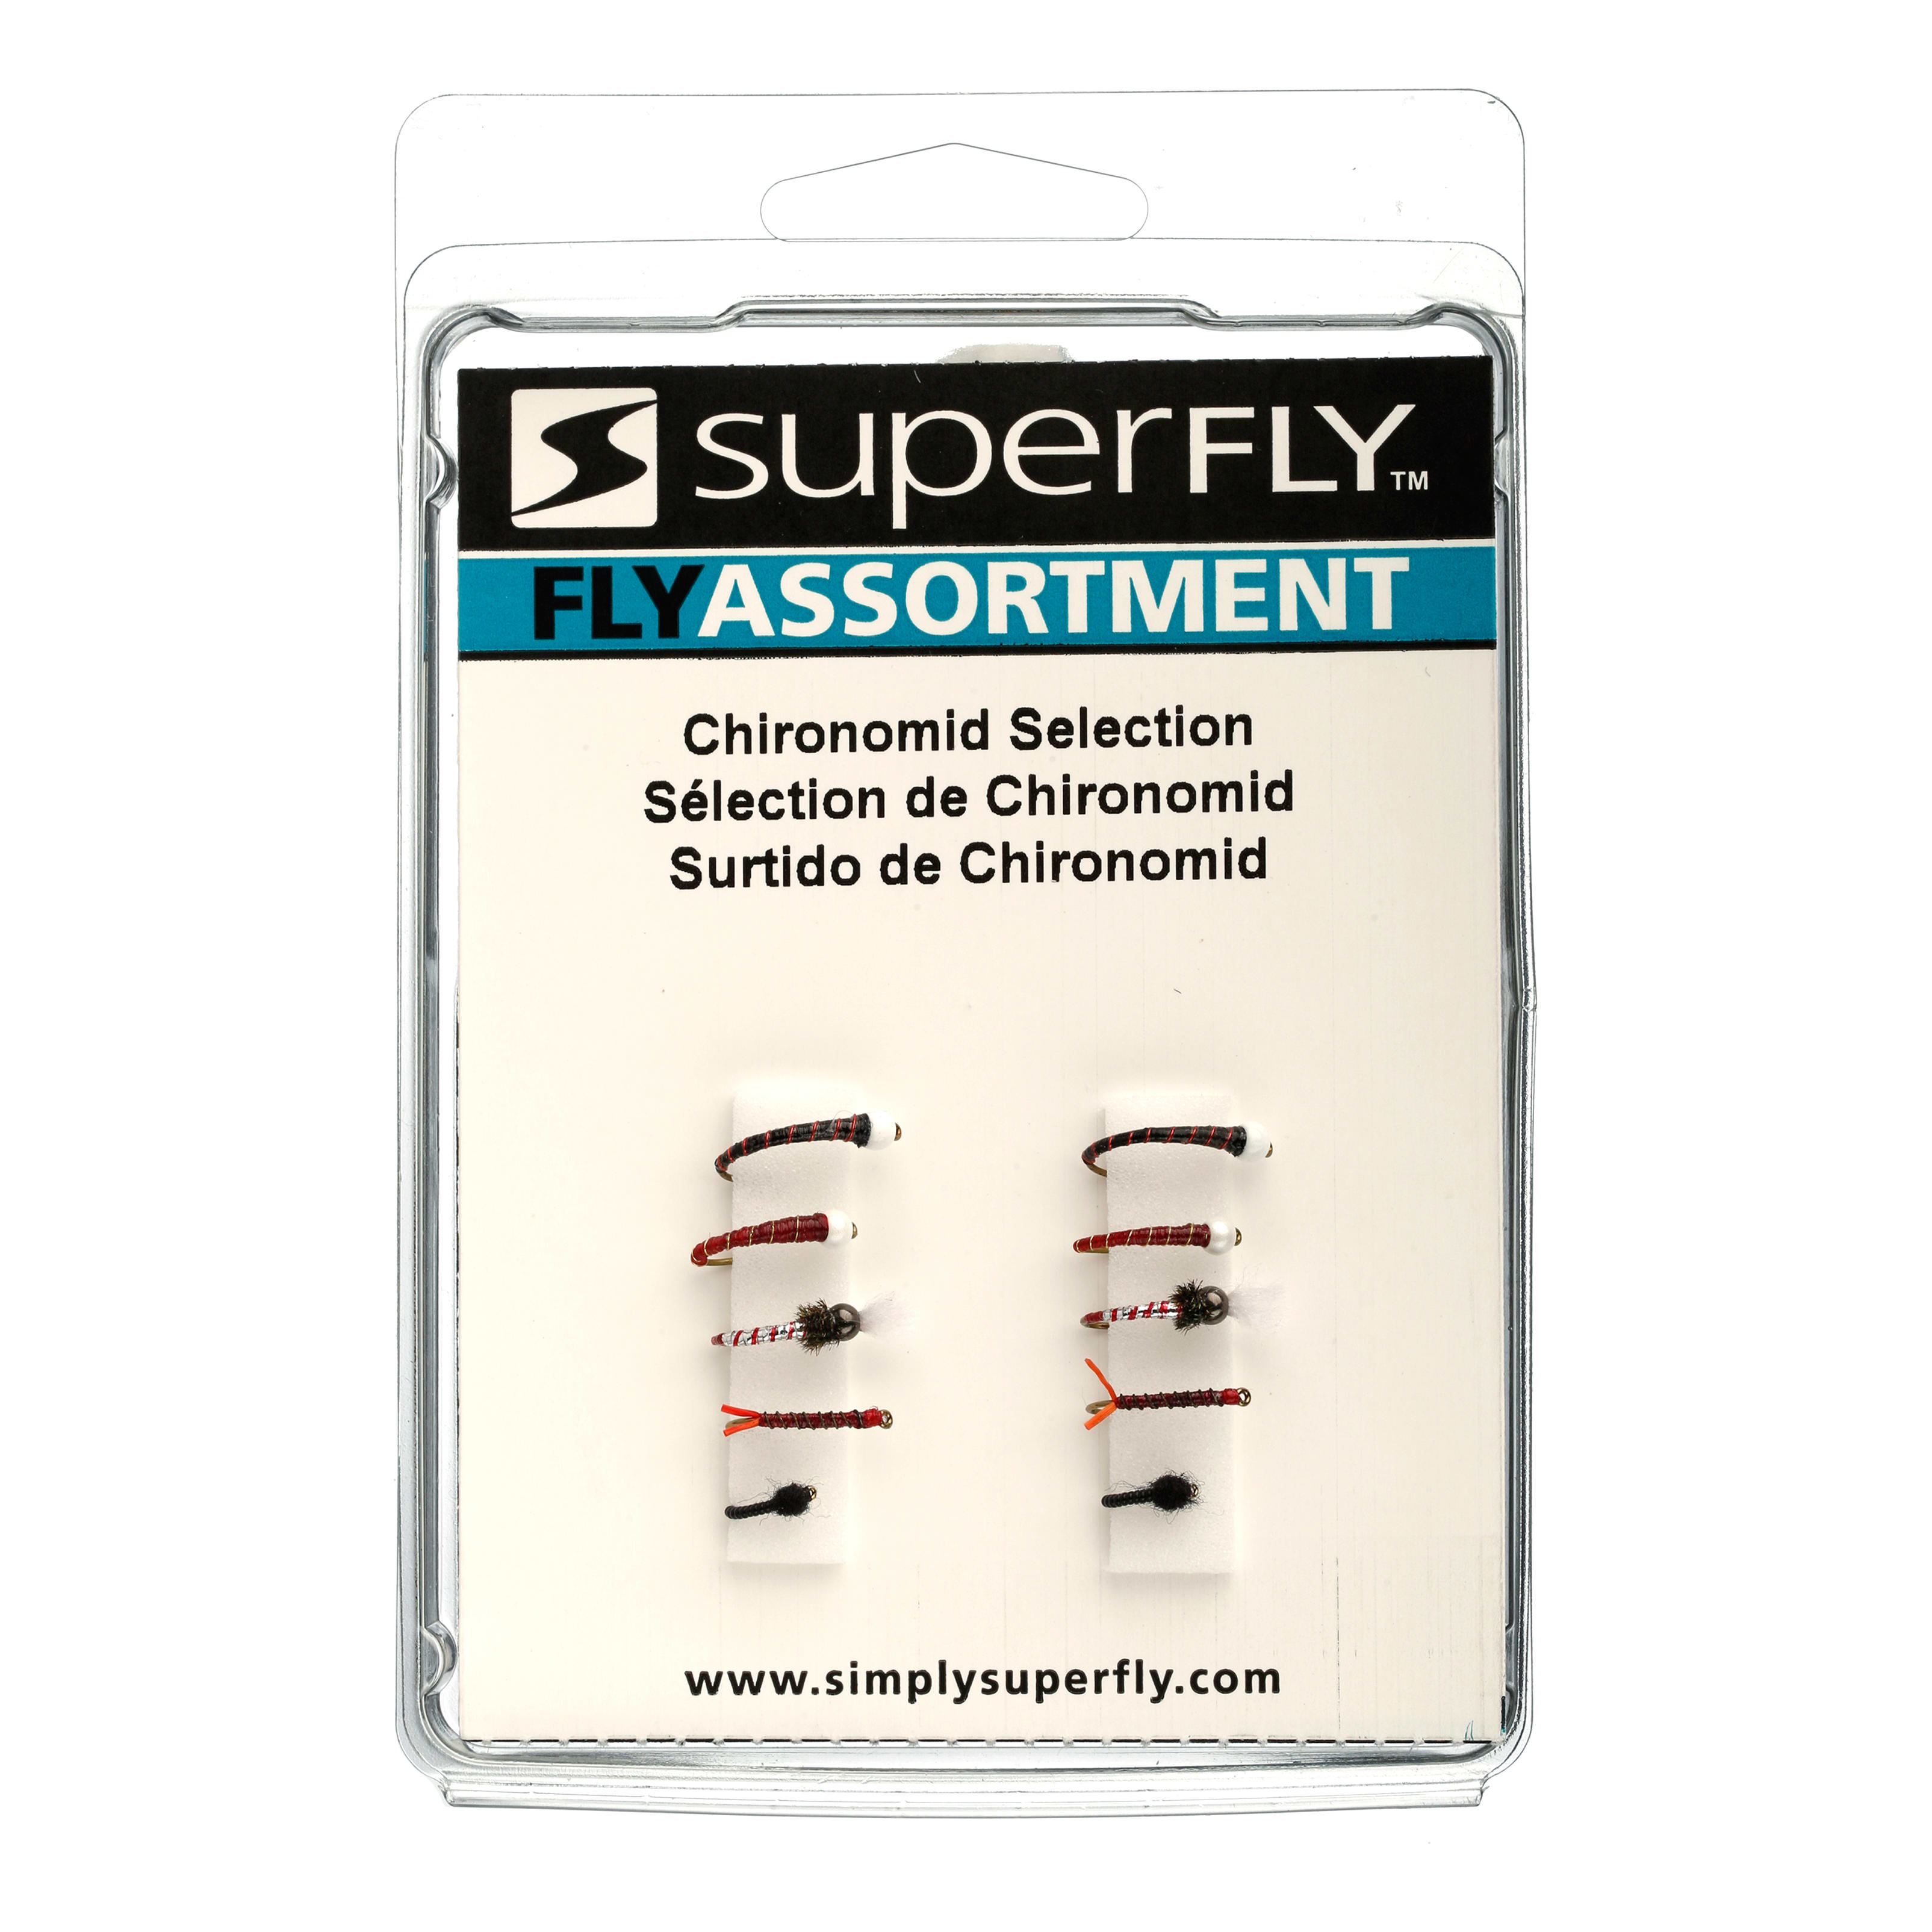 Superfly Premium Chironomid Selection